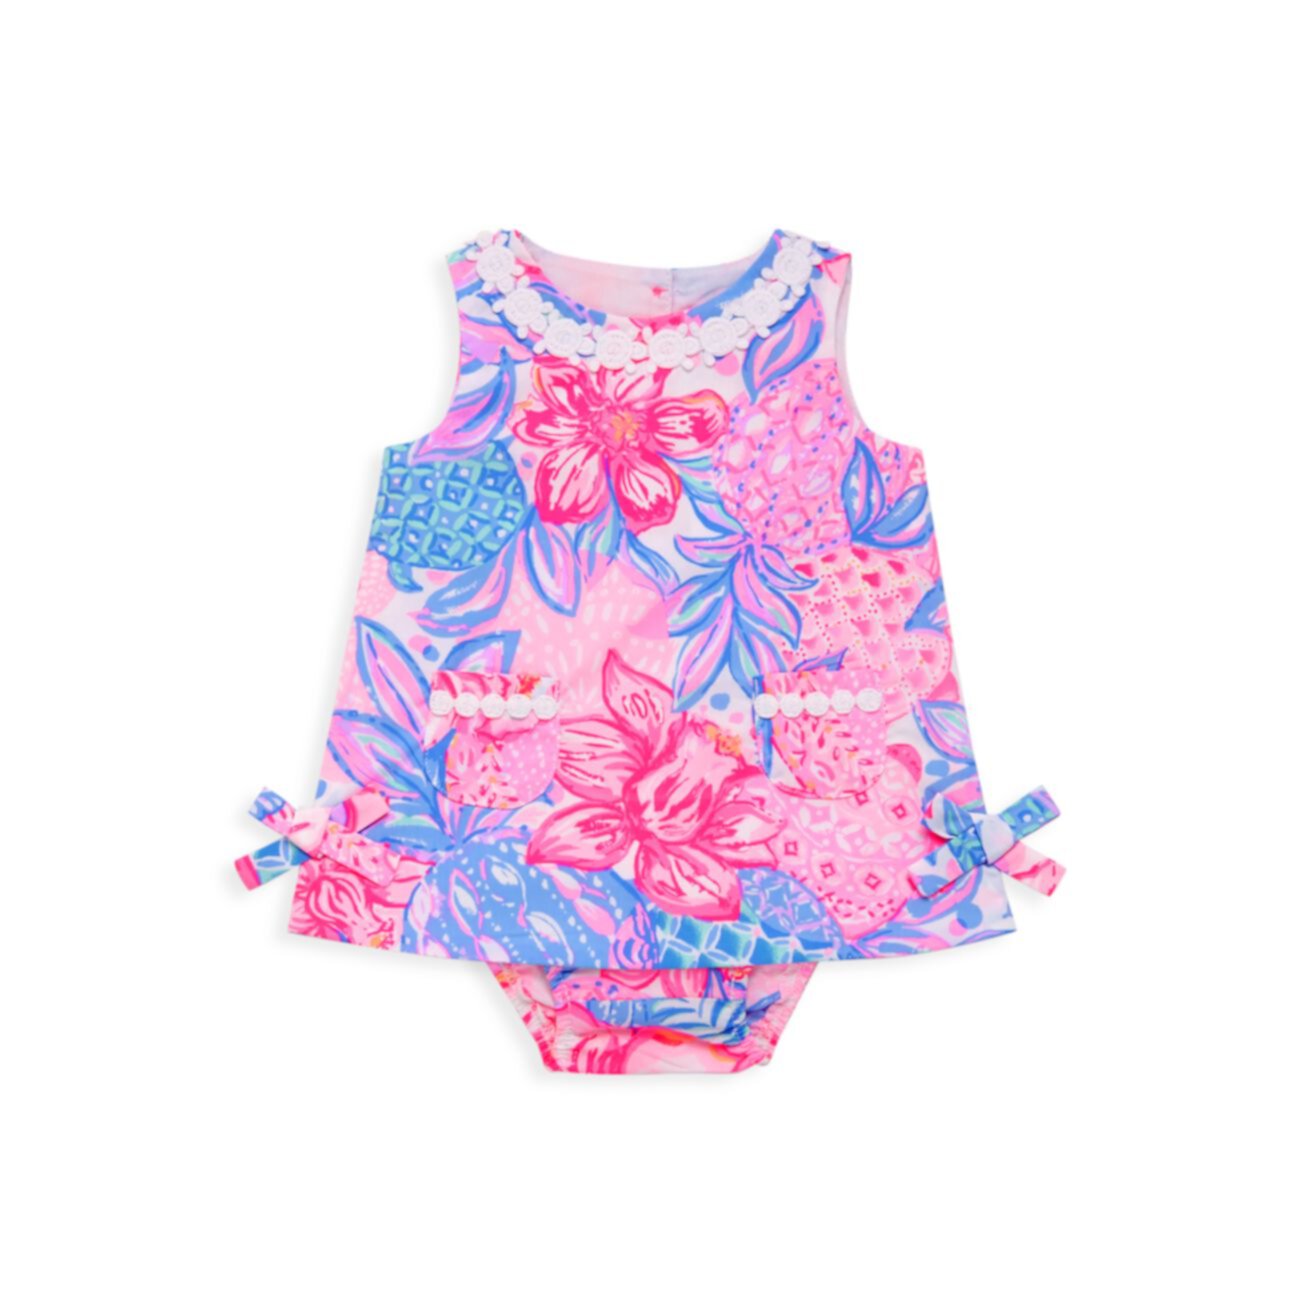 Baby Girl's Lilly Shift Set Lilly Pulitzer Kids